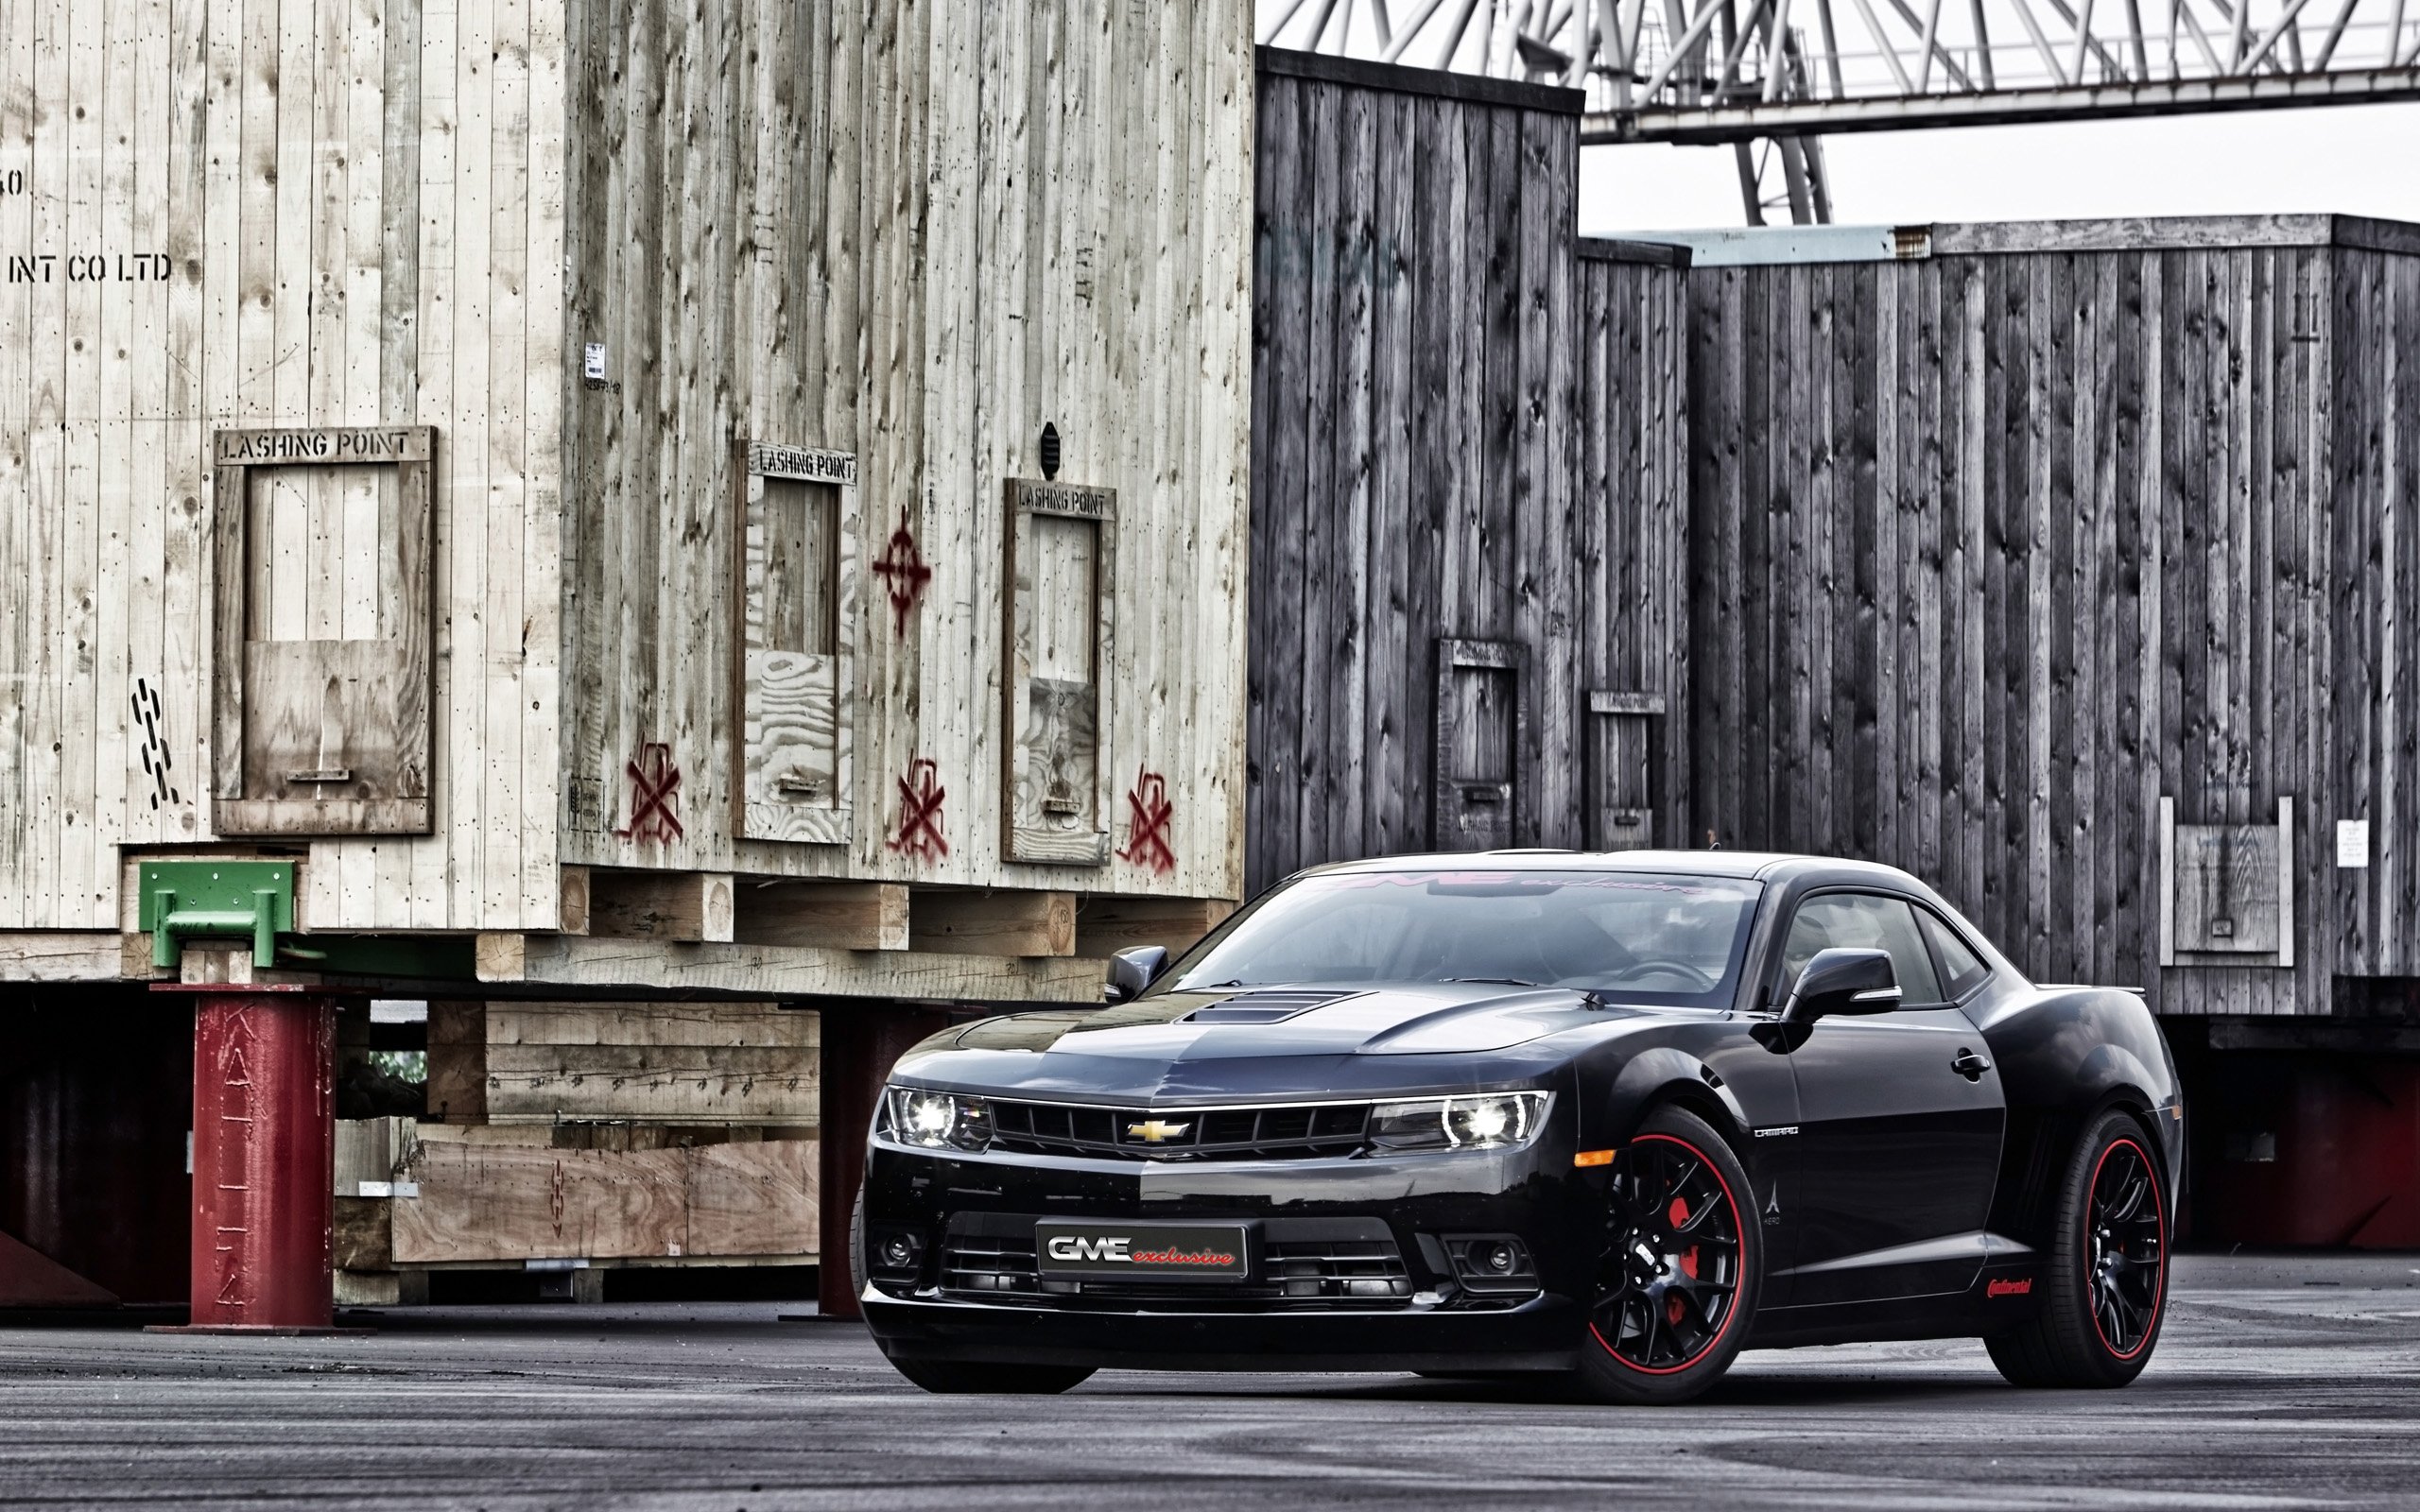 2014, Chevrolet, Camaro, S s, Gme exclusive, Muscle, Hot, Rod, Rods, Tuning Wallpaper